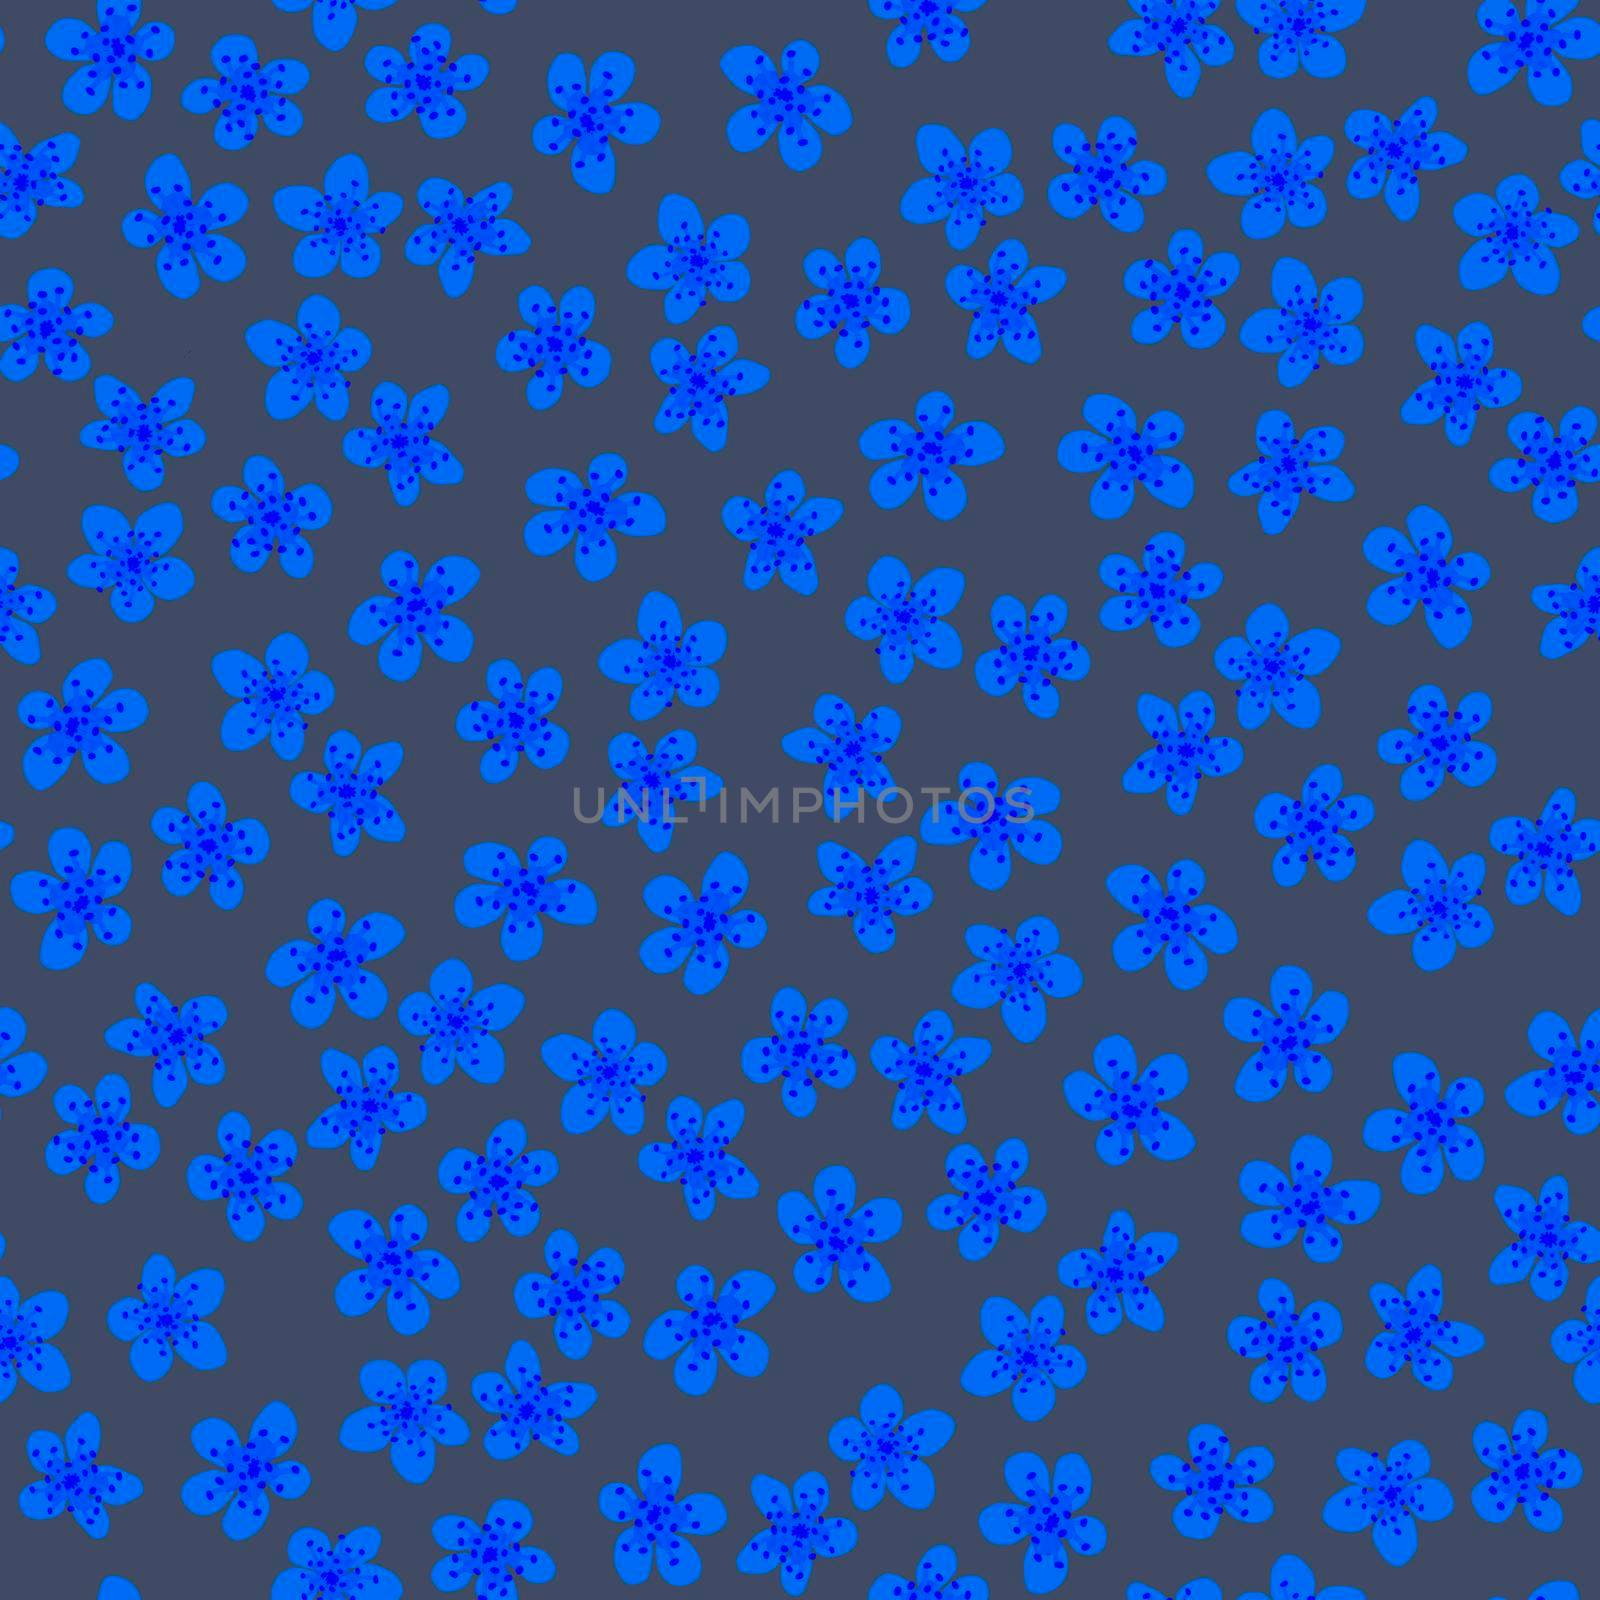 Seamless pattern with blossoming Japanese cherry sakura for fabric,packaging, wallpaper, textile decor, design, invitations, print, gift wrap, manufacturing. Cornflower blue flowers on gray background